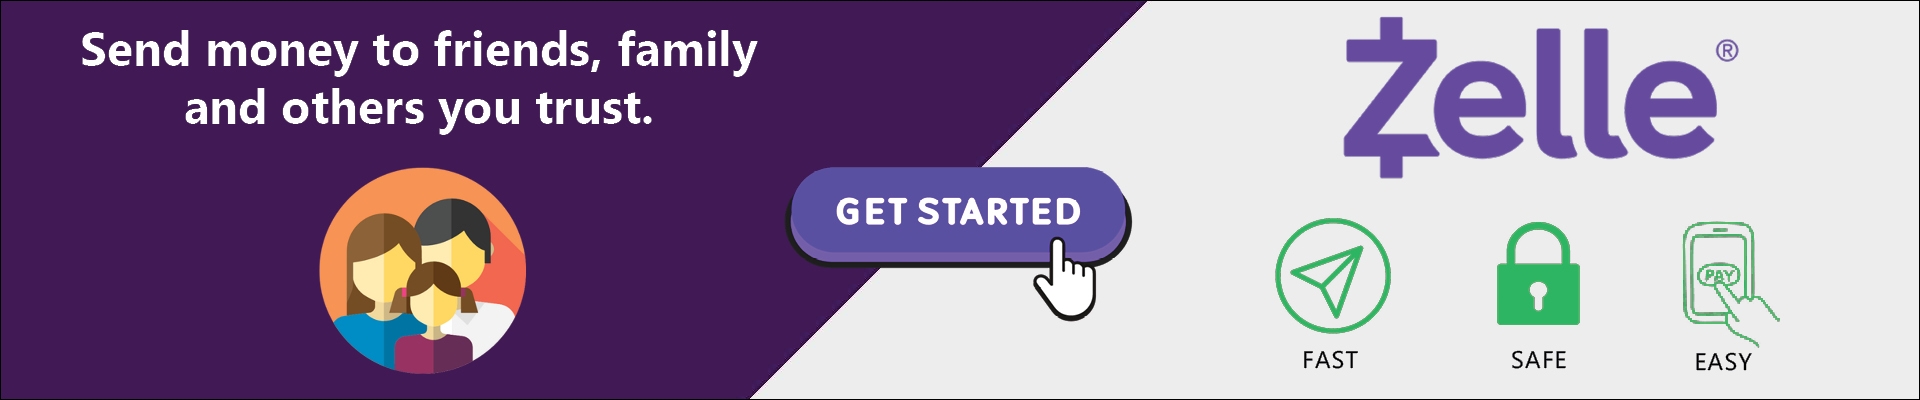 Get started with Zelle - Fast, safe, easy - send money to friends, family and others you trust Banner